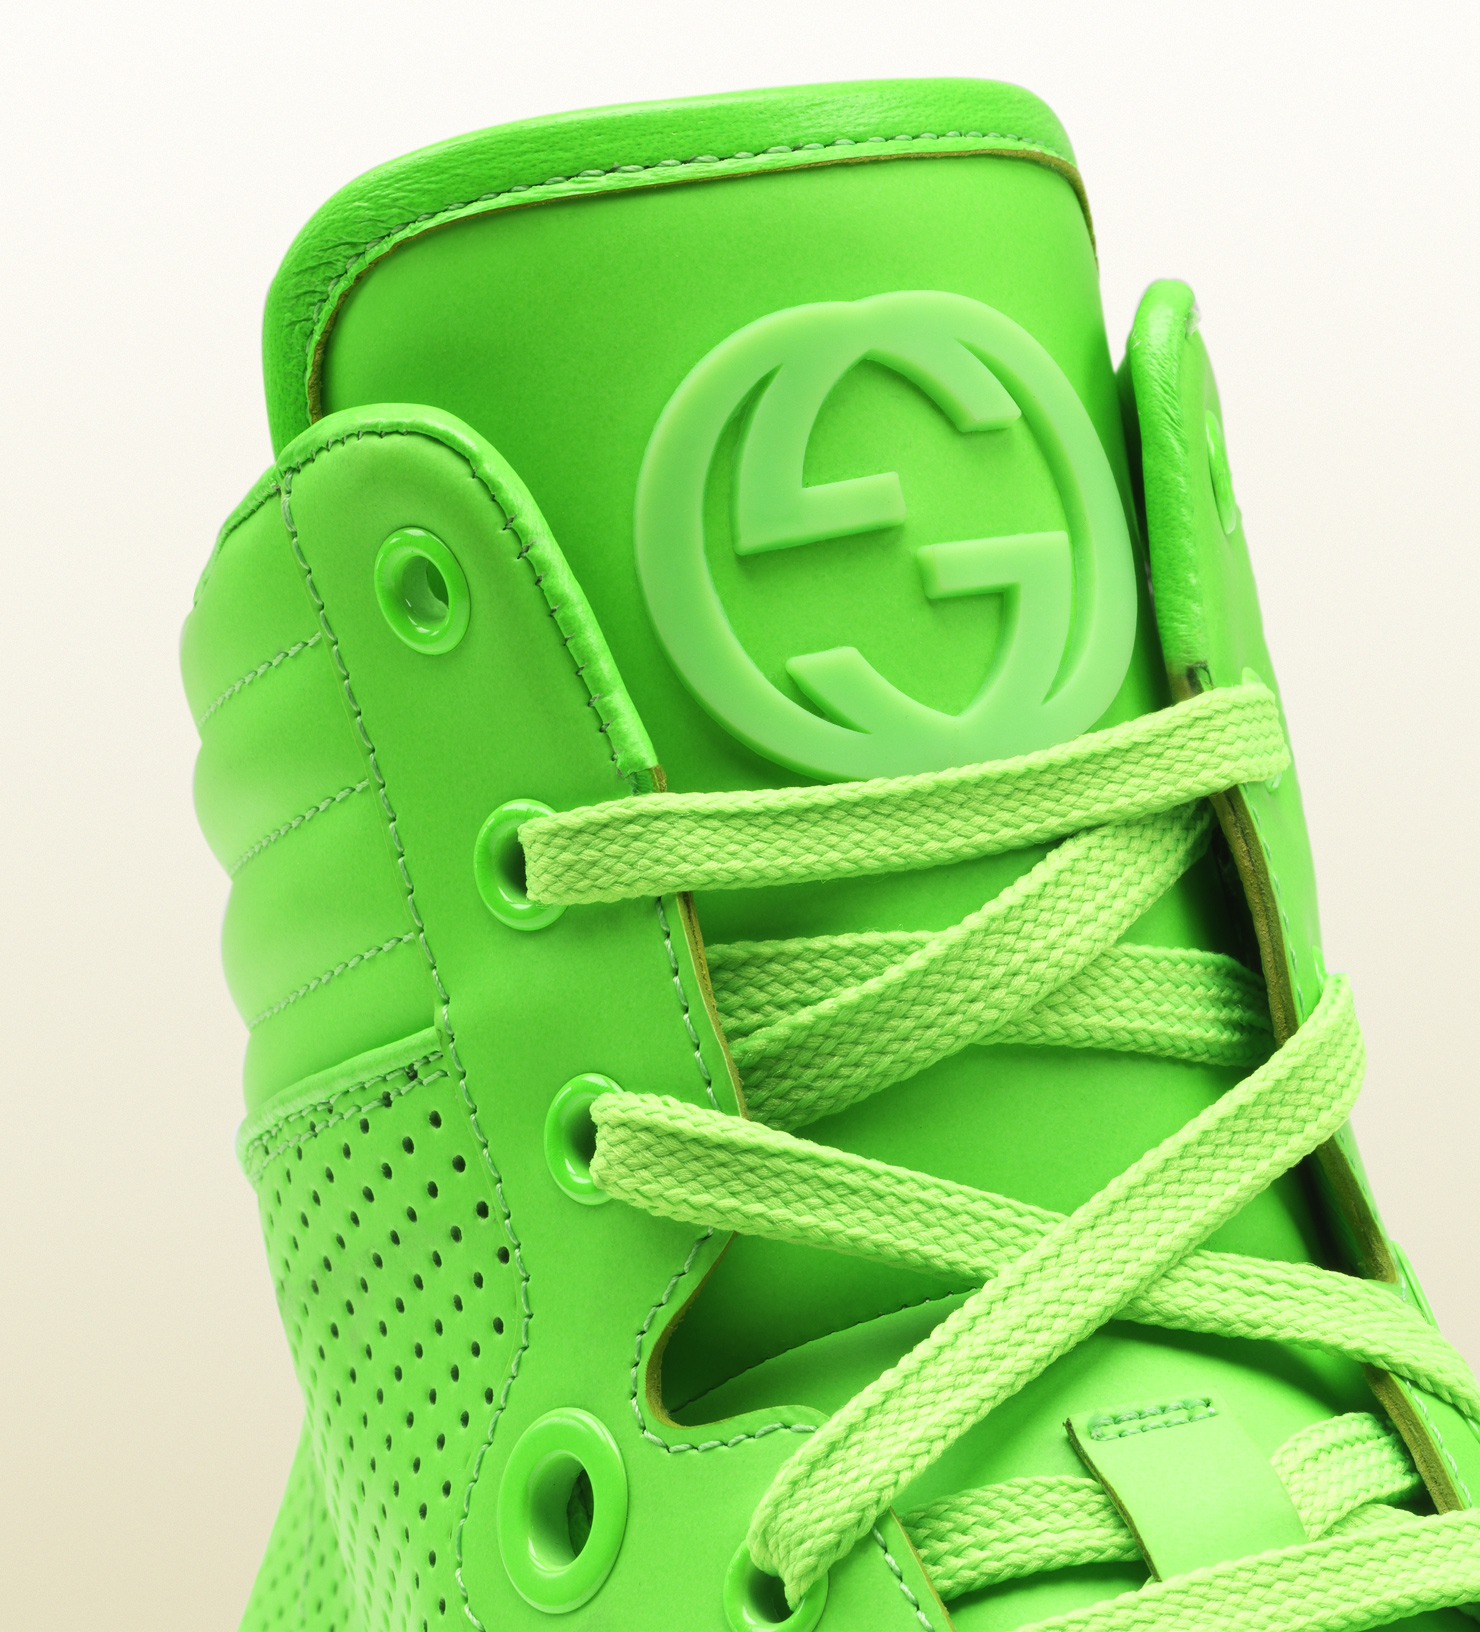 neon green gucci shoes